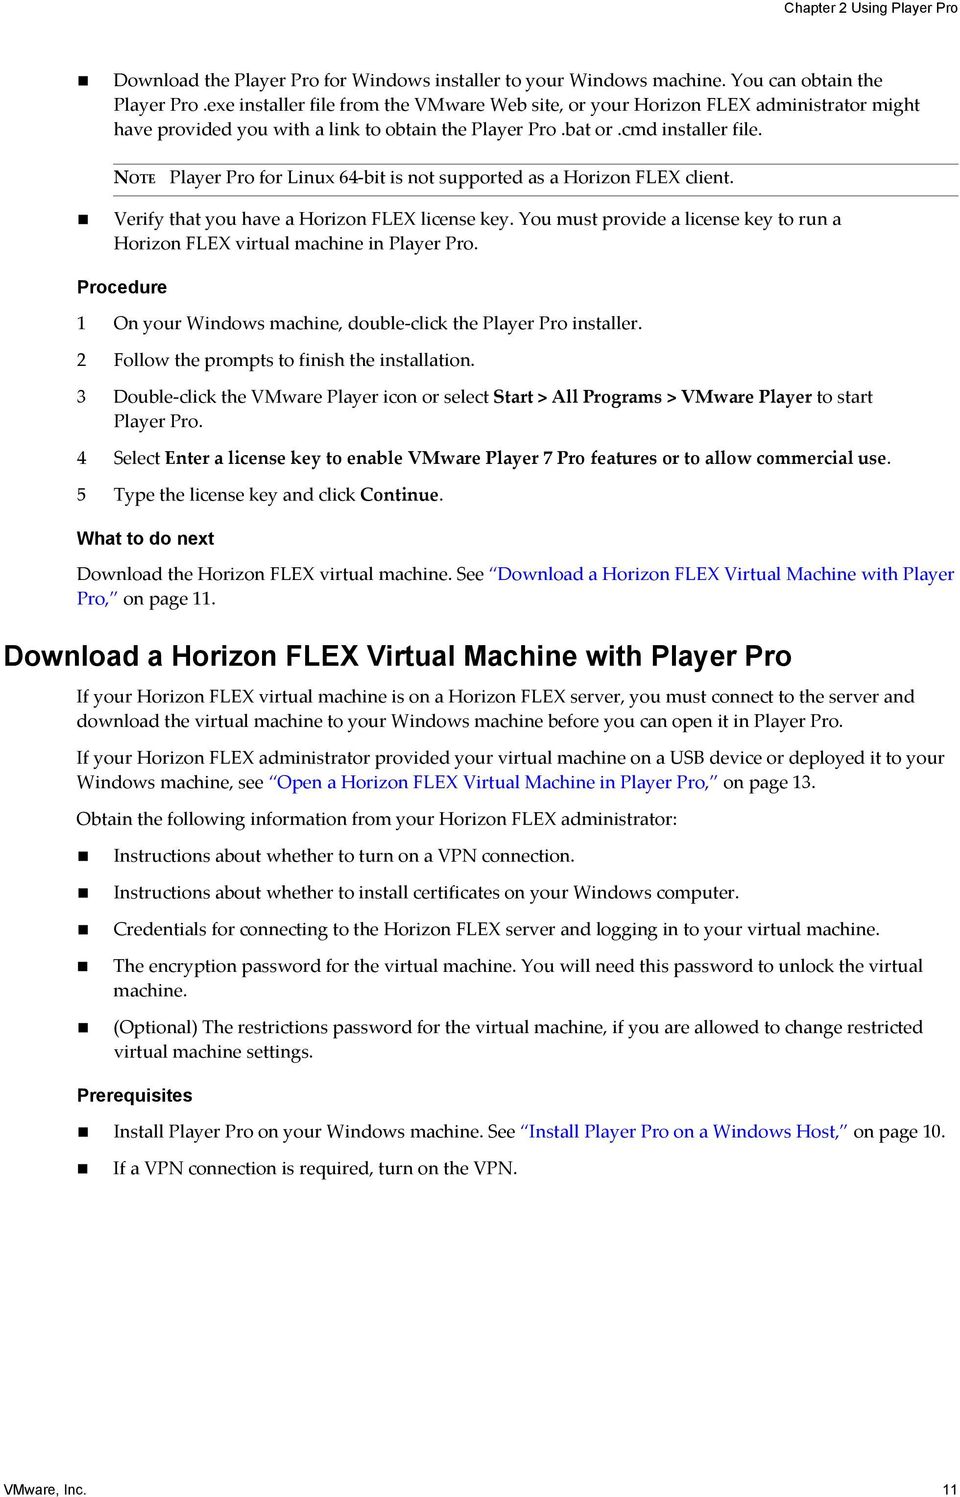 NOTE Player Pro for Linux 64-bit is not supported as a Horizon FLEX client. Verify that you have a Horizon FLEX license key.